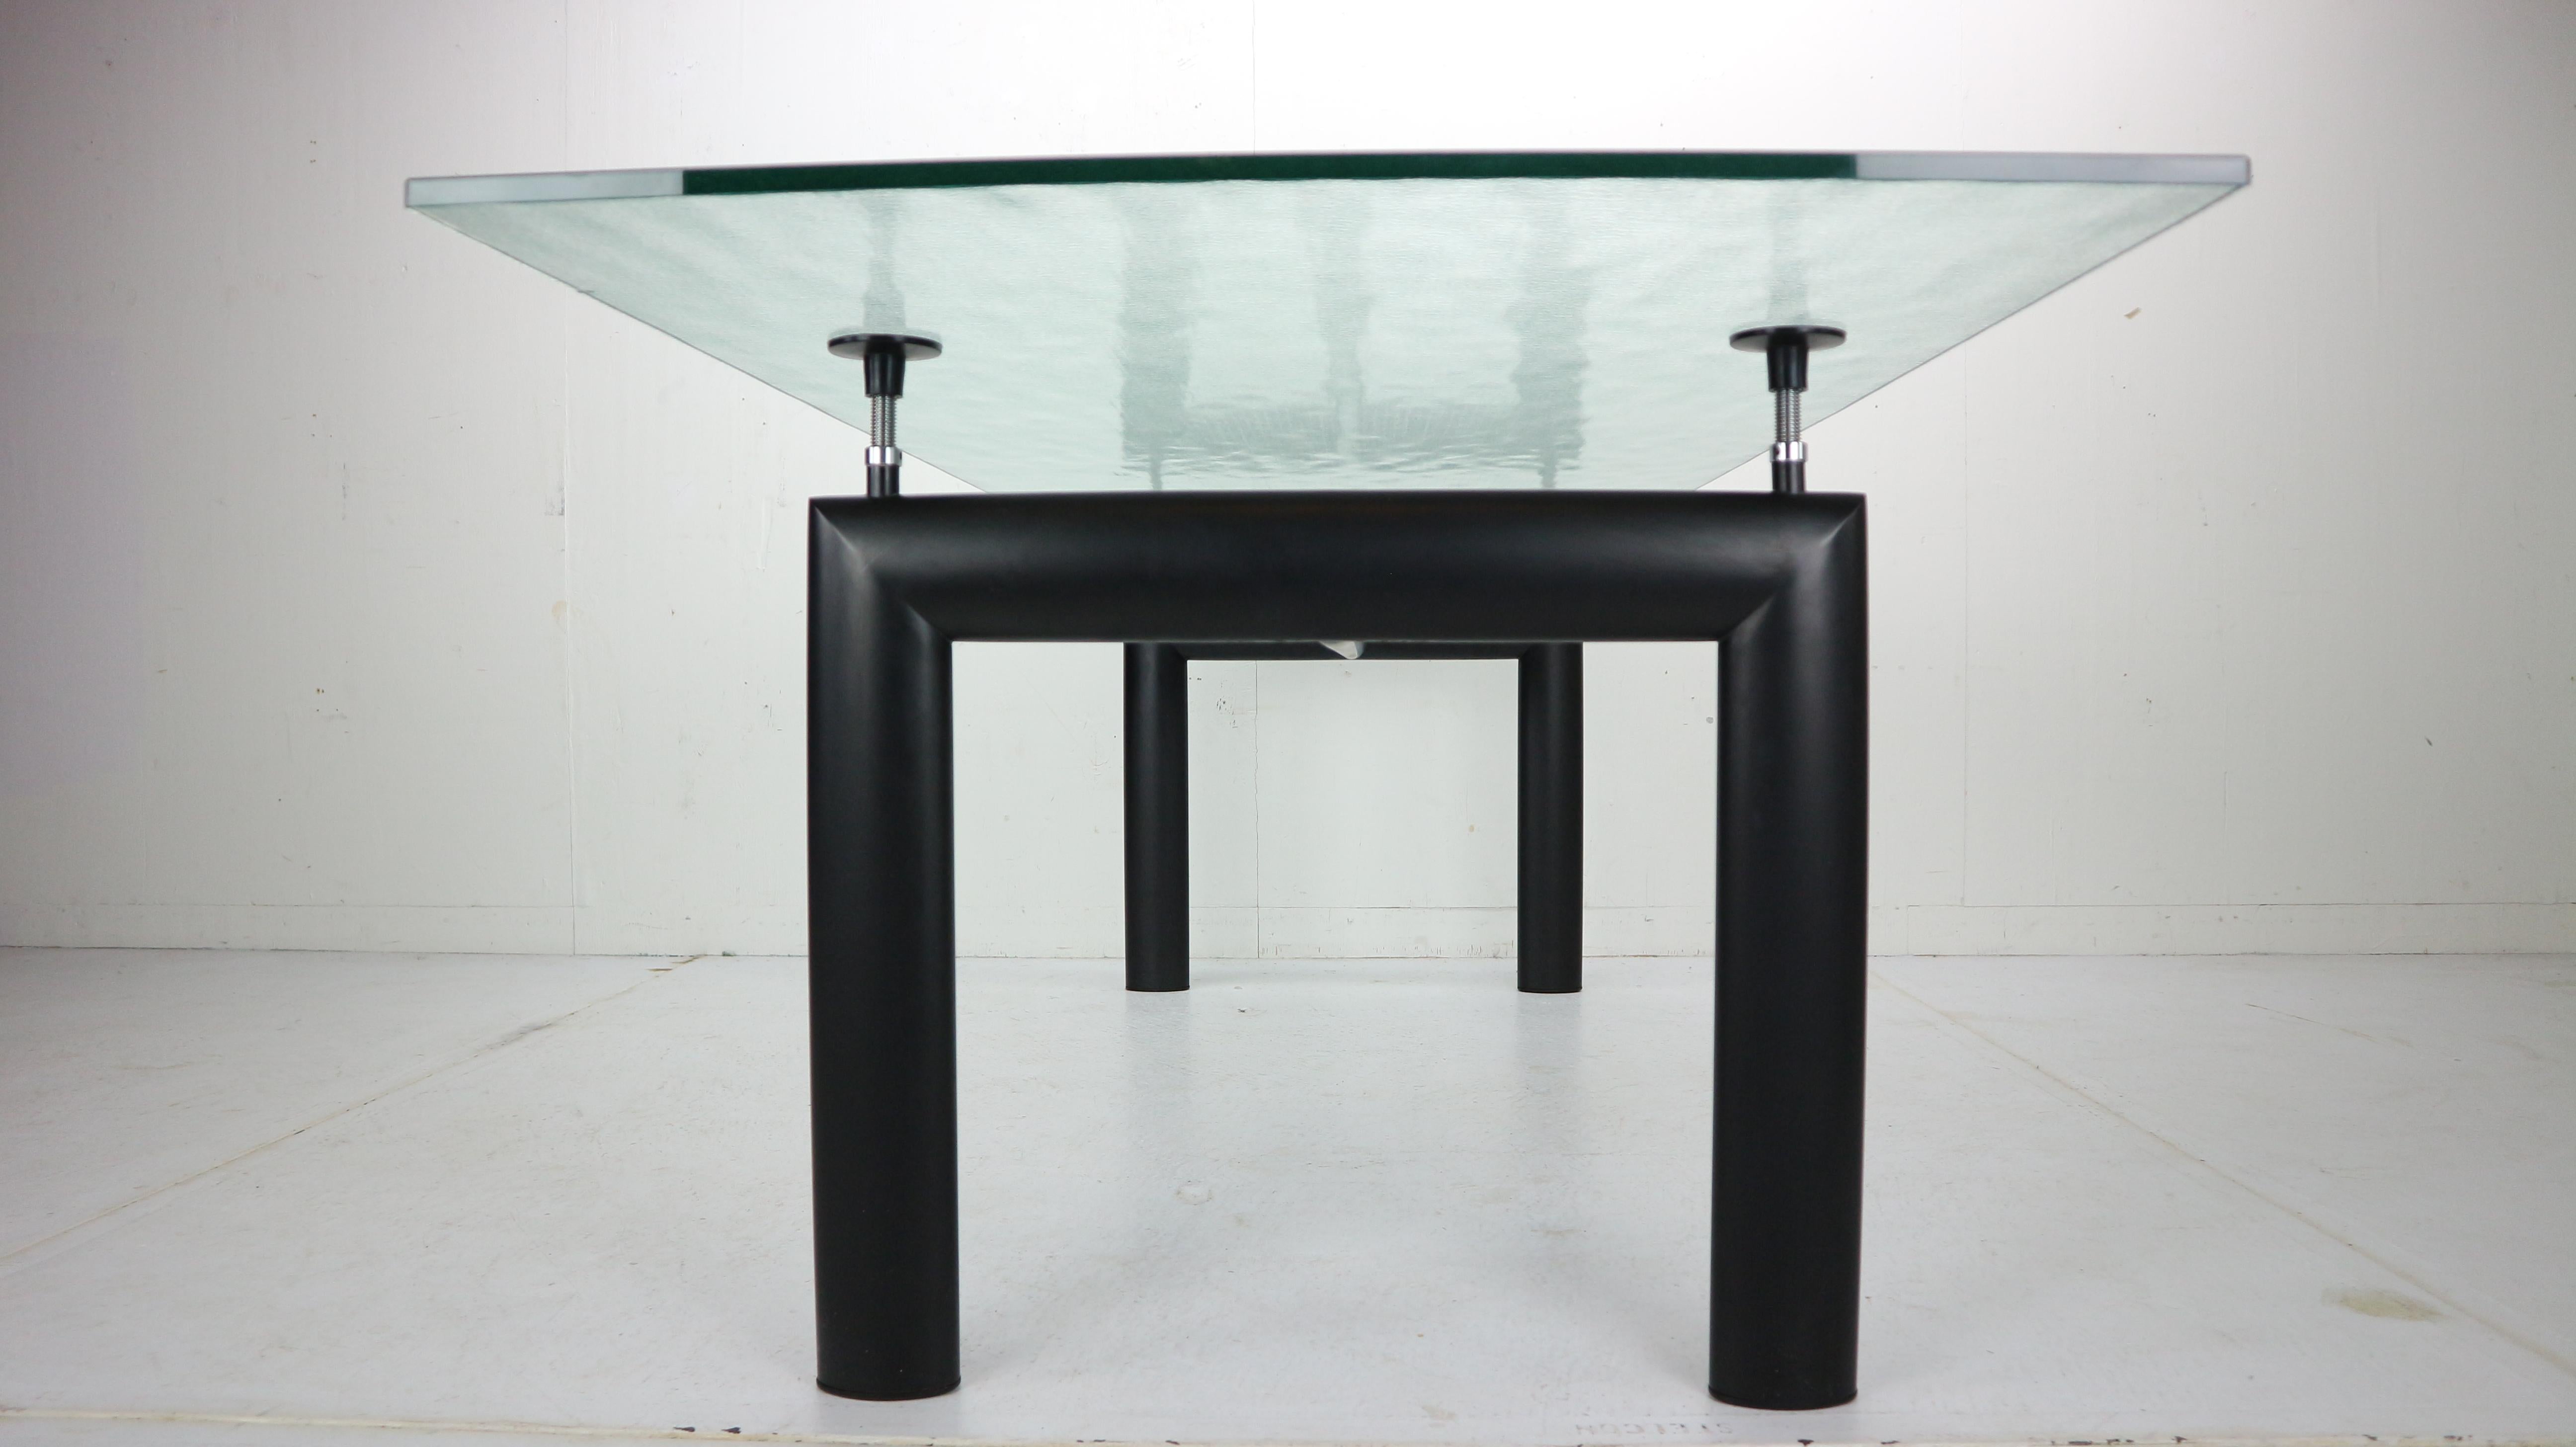 Steel Le Corbusier Glass Dinning Table ‘LC6’ For Cassina, 1970s Italy